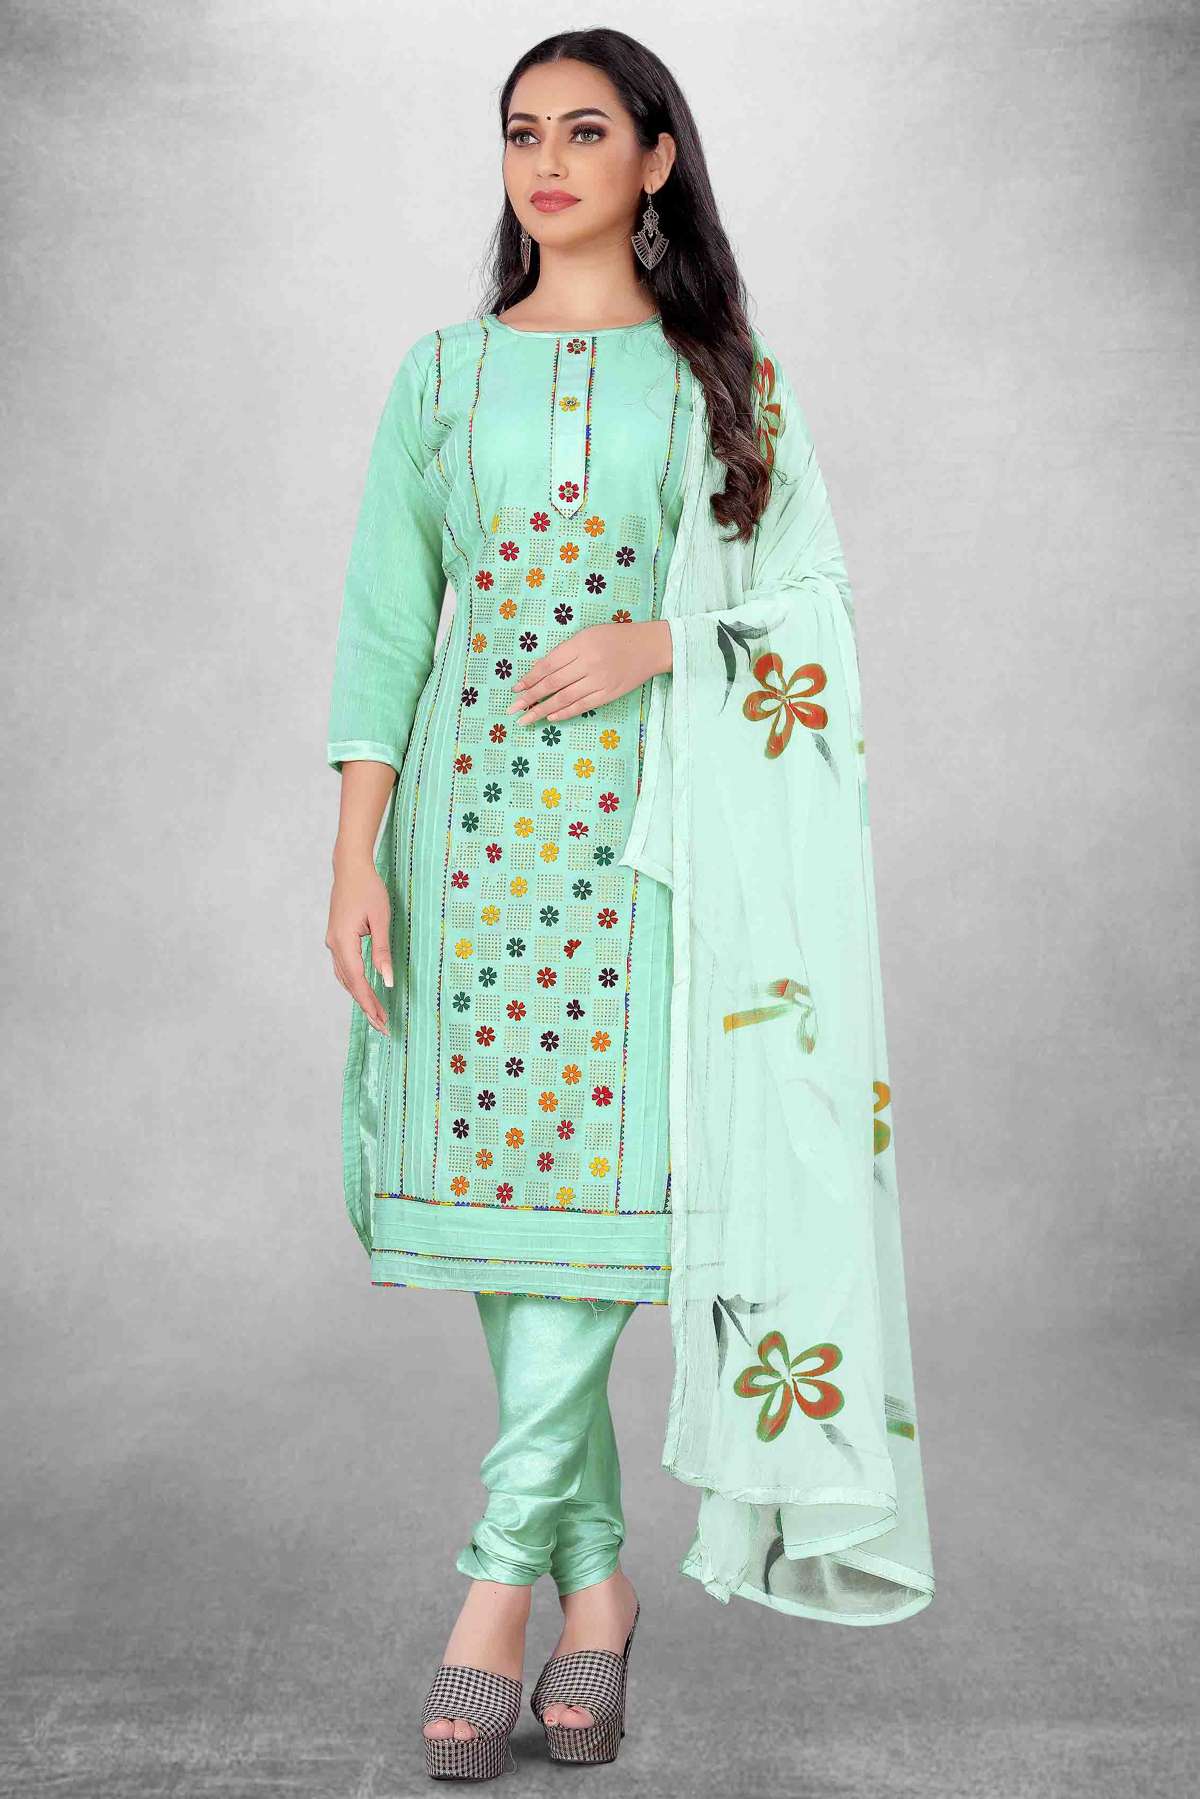 Unstitched Modal Cotton Embroidery Churidar Suit In Sea Green Colour - US3234456